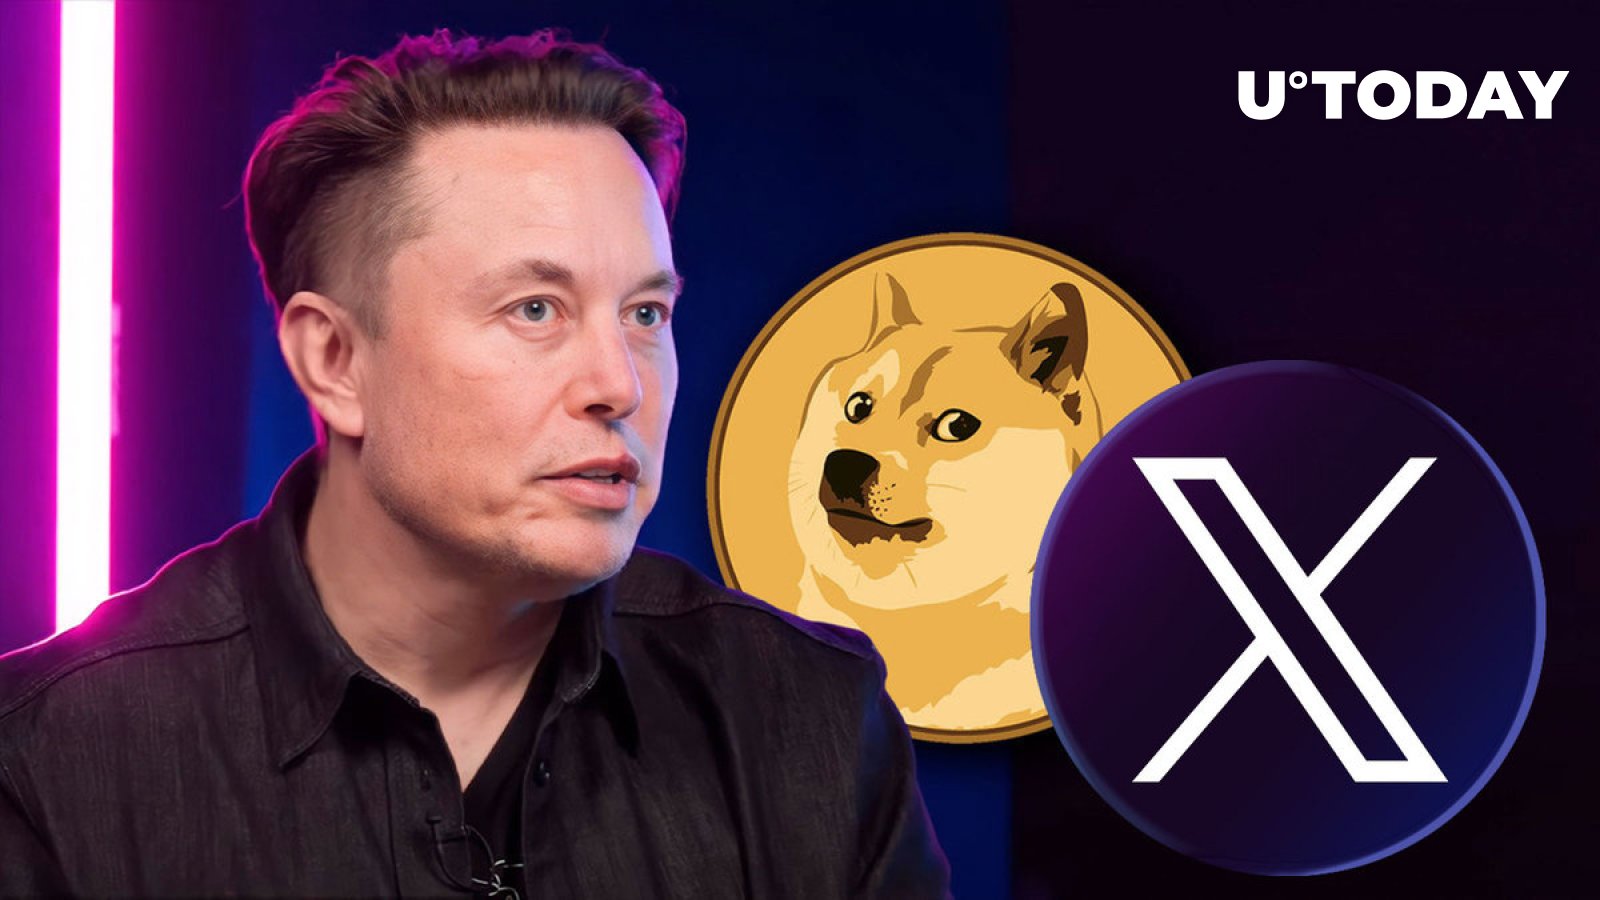 Dogecoin (DOGE) Shines as Elon Musk’s X Prepares to Launch P2P Payments